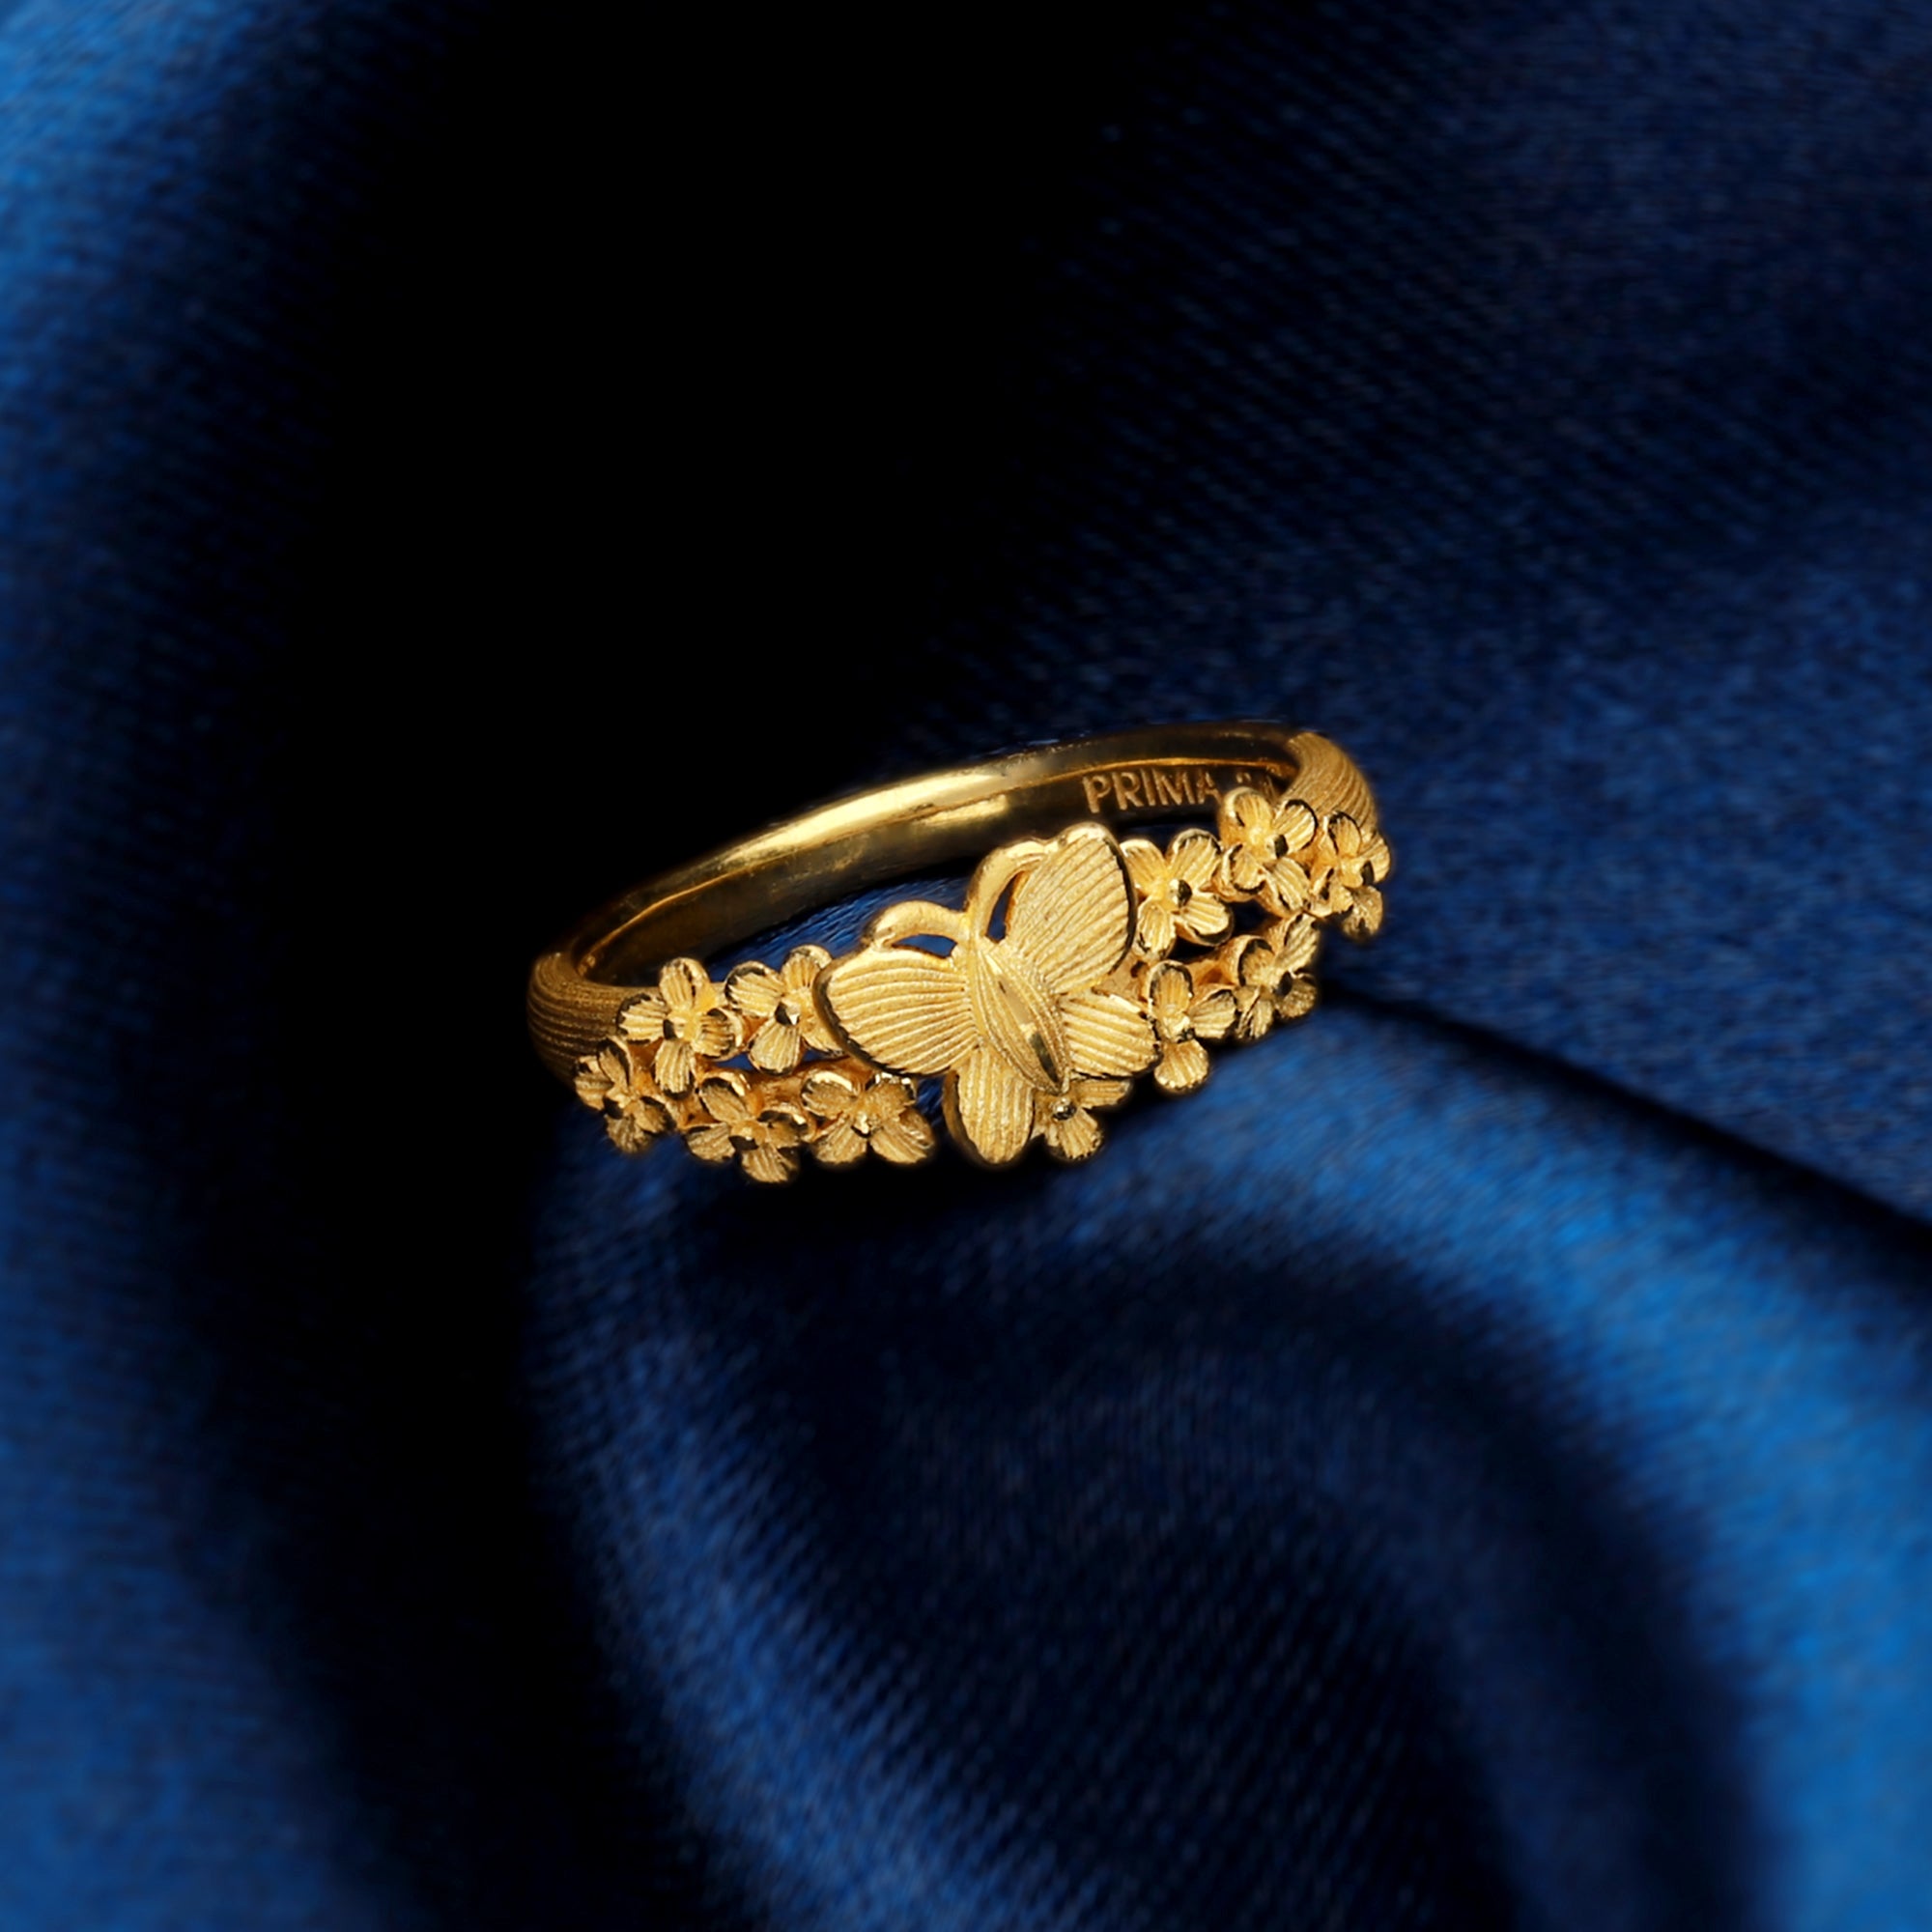 Buy Vintage Pure 24K Solid Gold Wedding Band Ring Size 9.5 Online in India  - Etsy